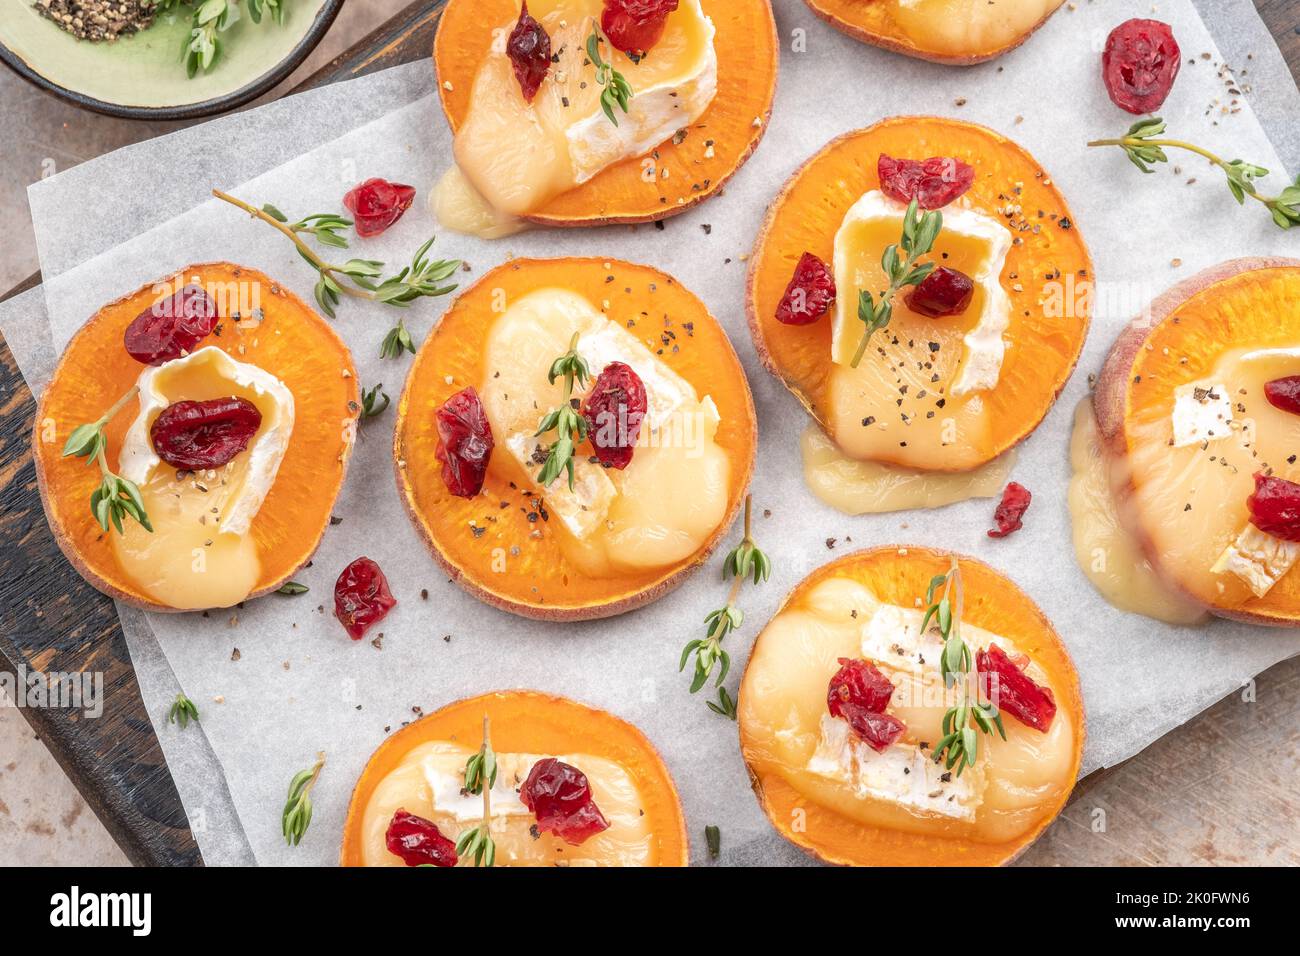 Baked Sweet Potato with brie cheese, cranberry and Walnut Stock Photo